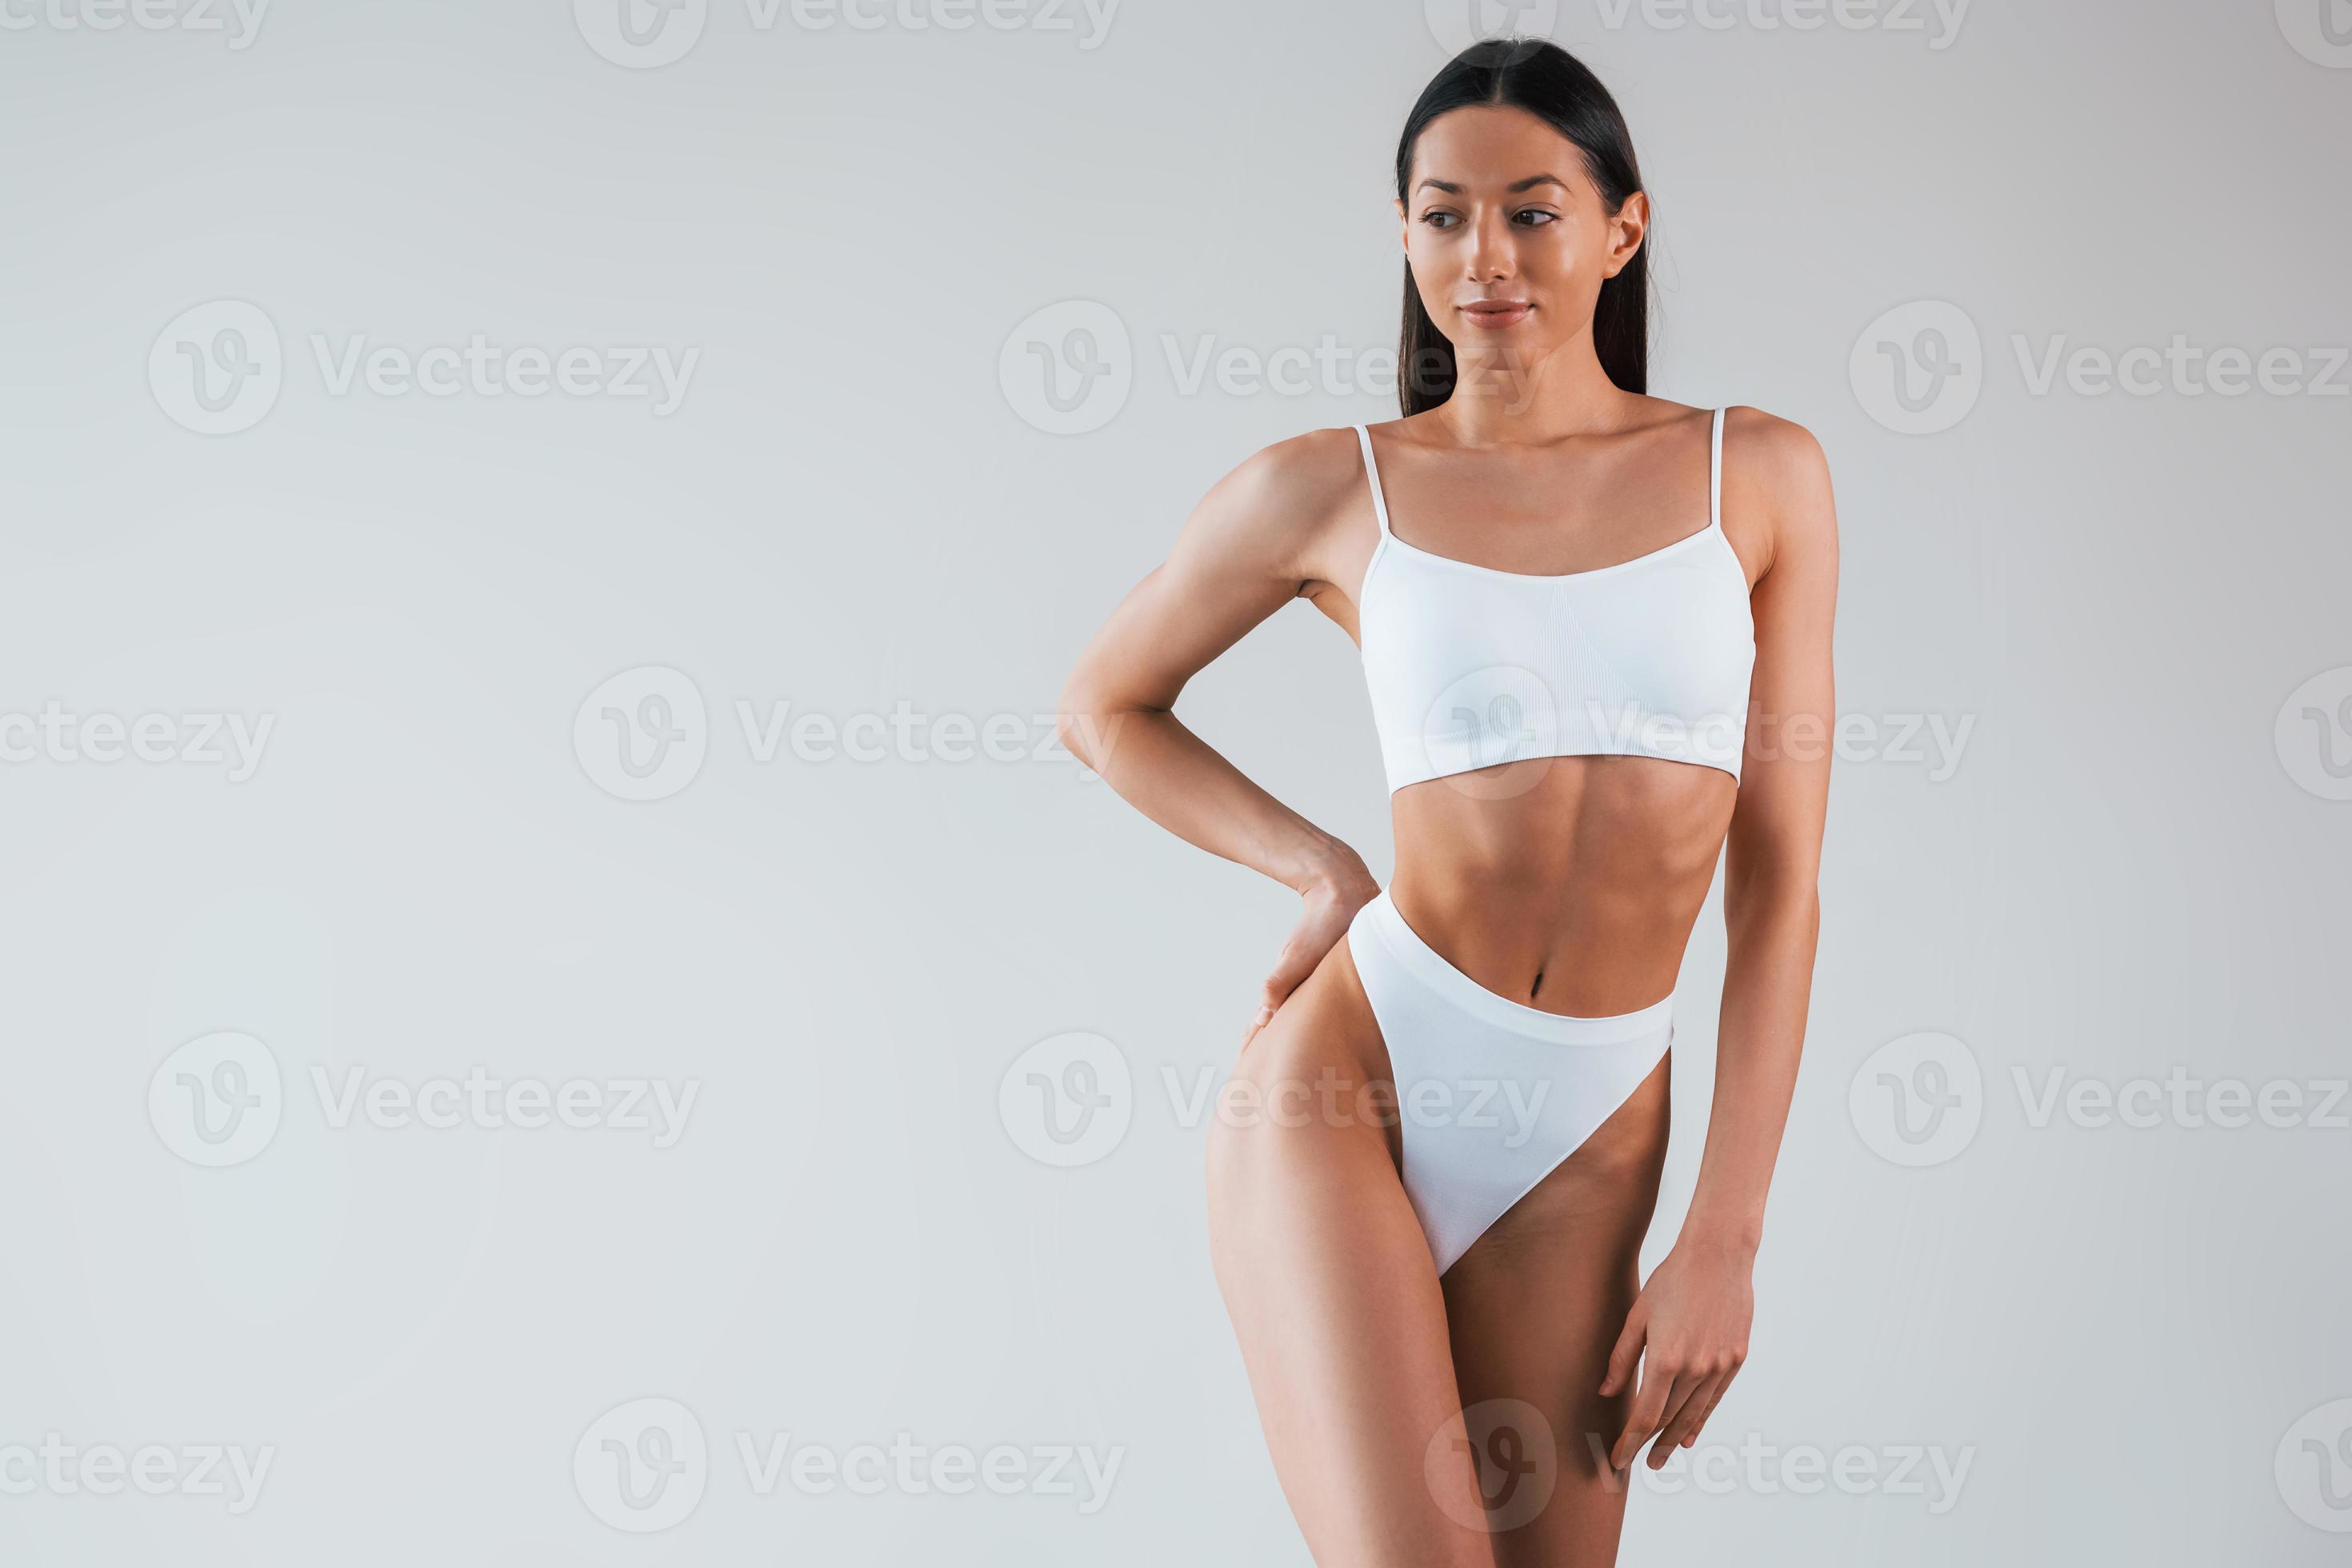 https://static.vecteezy.com/system/resources/previews/015/303/633/large_2x/in-white-underwear-woman-with-sportive-slim-body-type-that-is-in-the-studio-photo.jpg